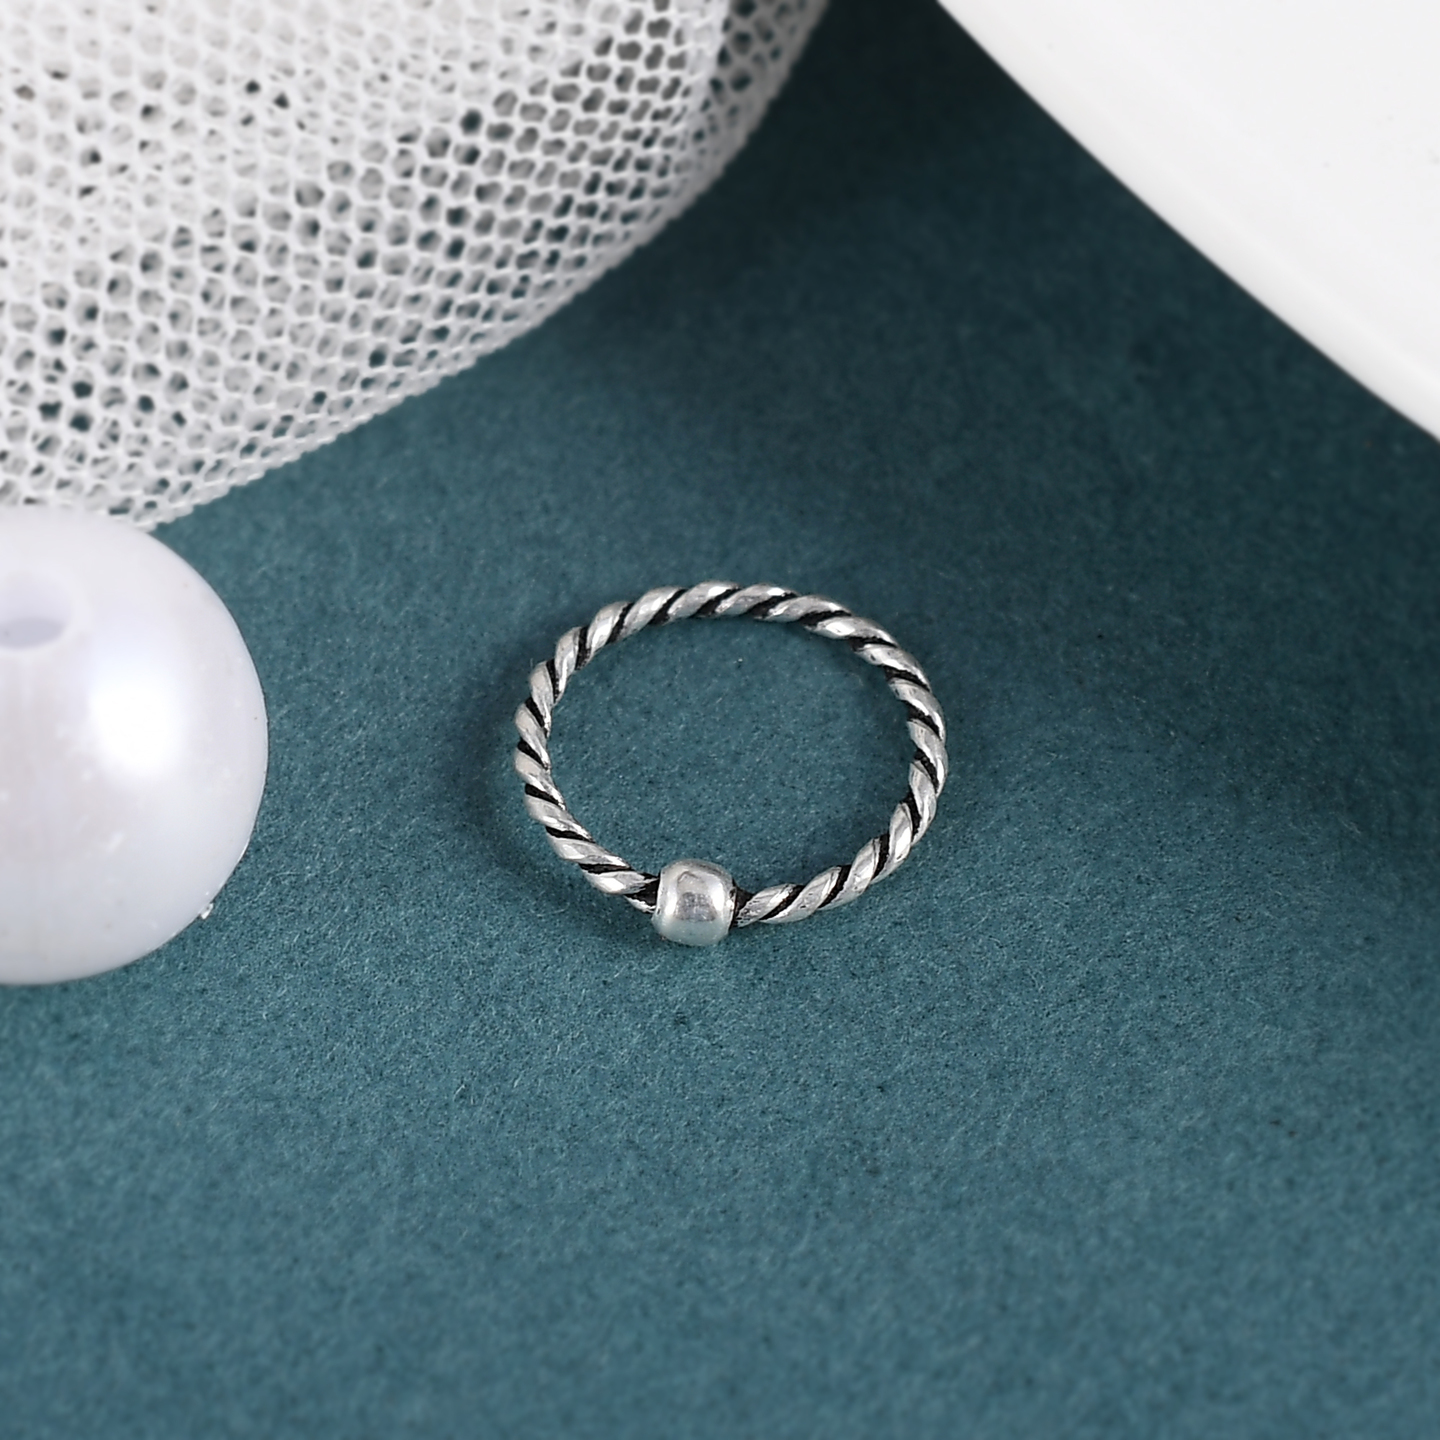 925 Silver Nose Ring or Helix Earring (1 pc)